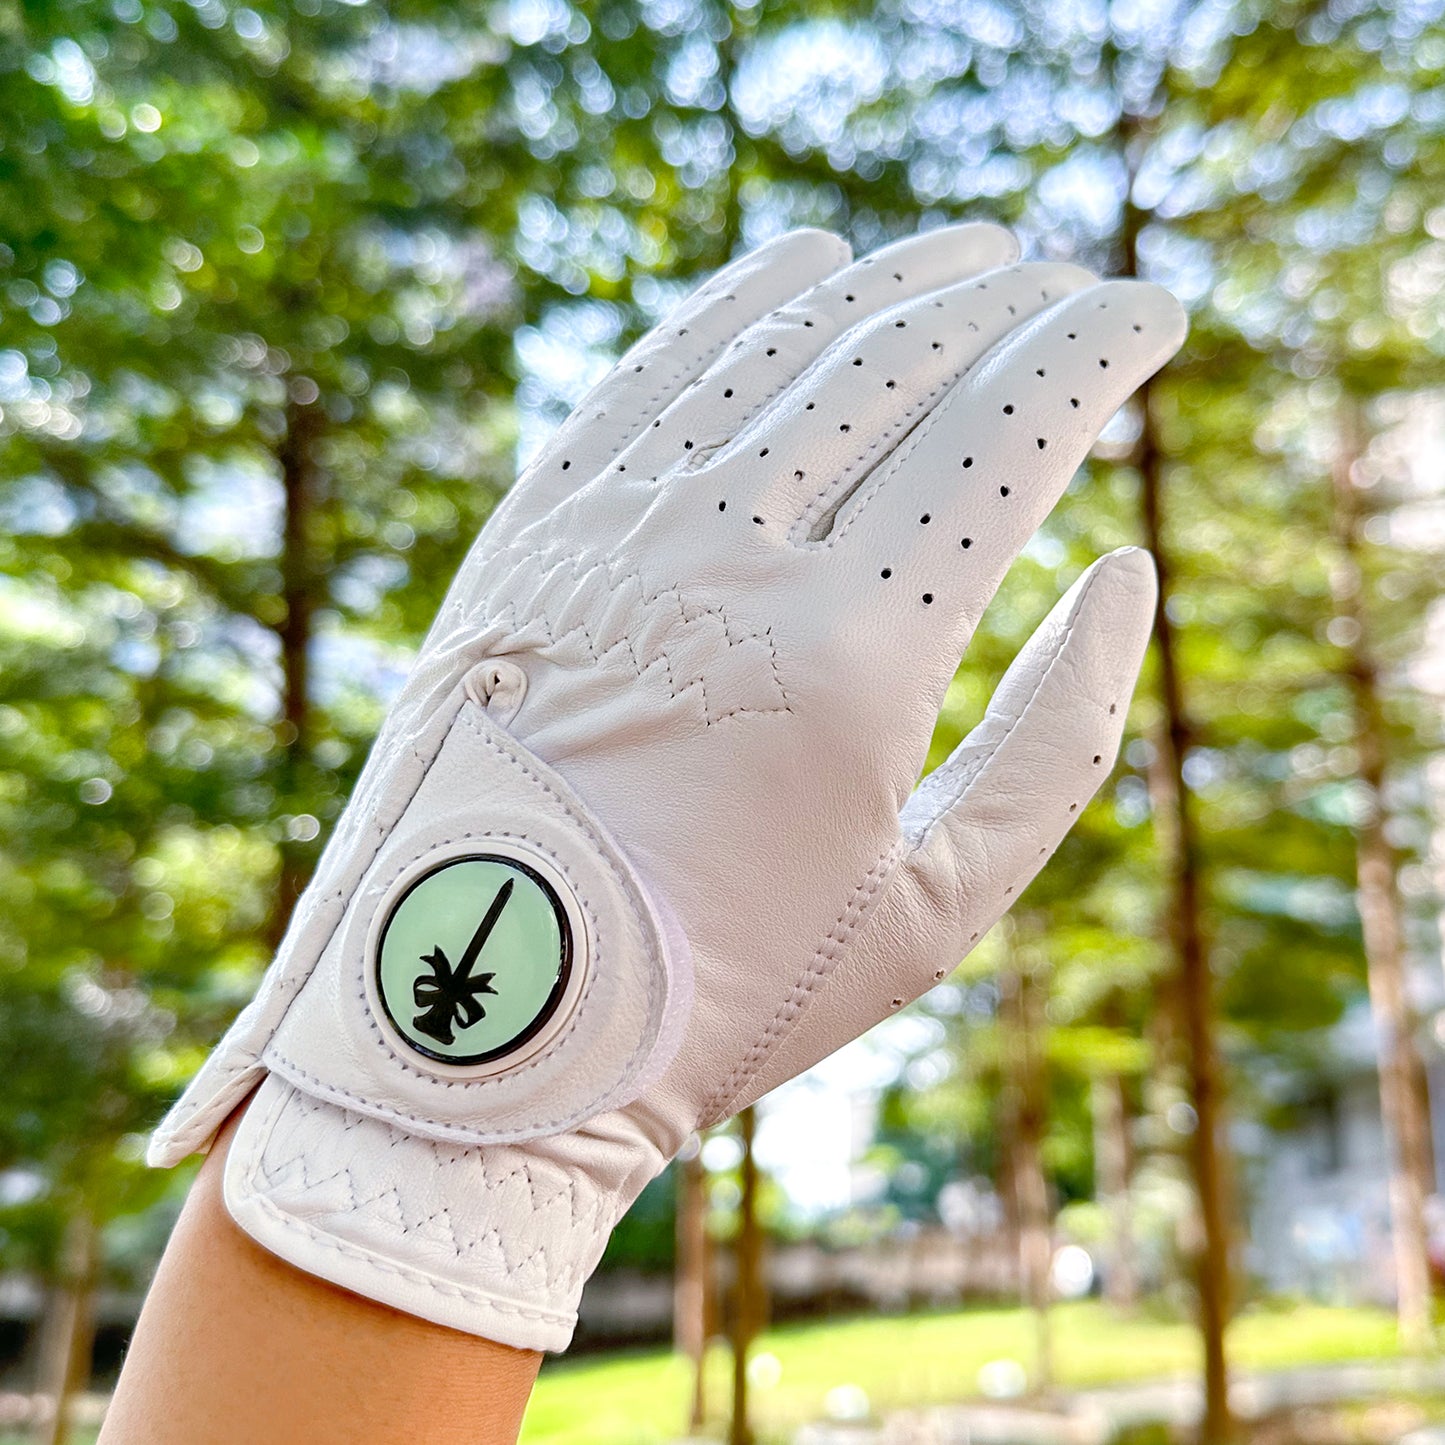 PINKTEE Golf Gloves for Women Left Hand Soft Leather with Ball Marker Full Finger Fit Size S M L XL